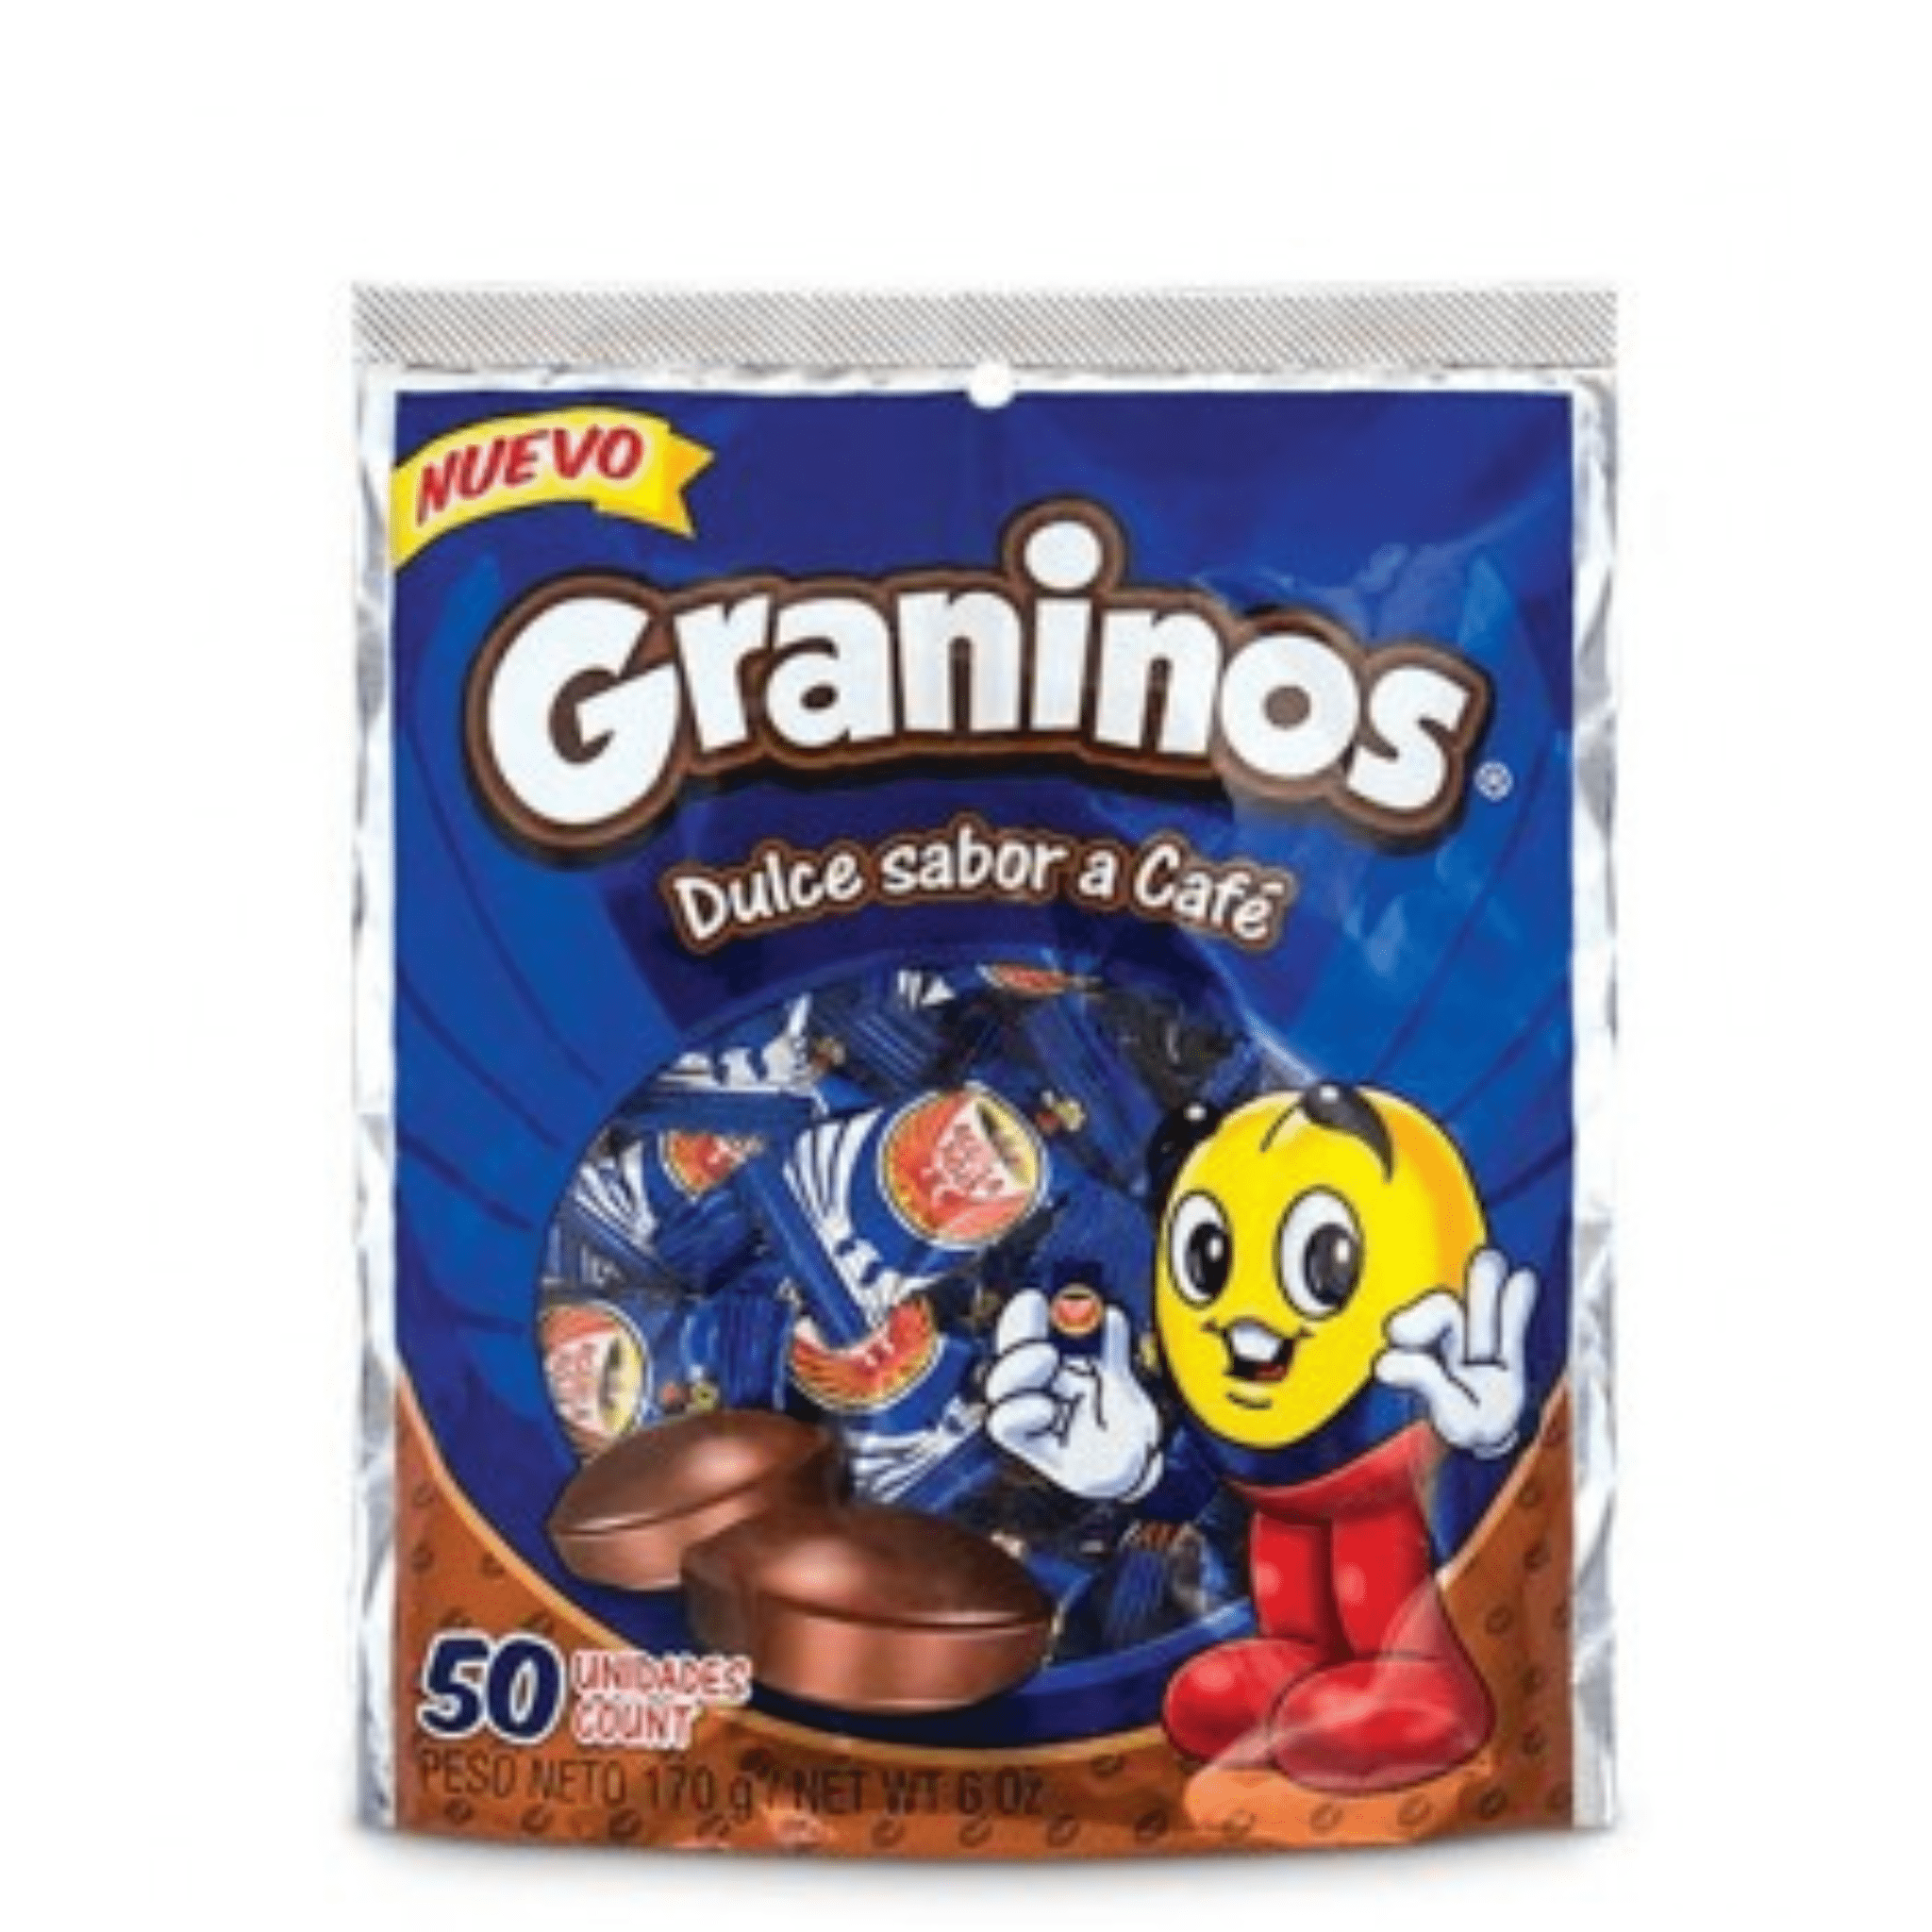 Aguila Roja Graninos Chewy Coffee Candies Package x 50 units - Colombian Coffee